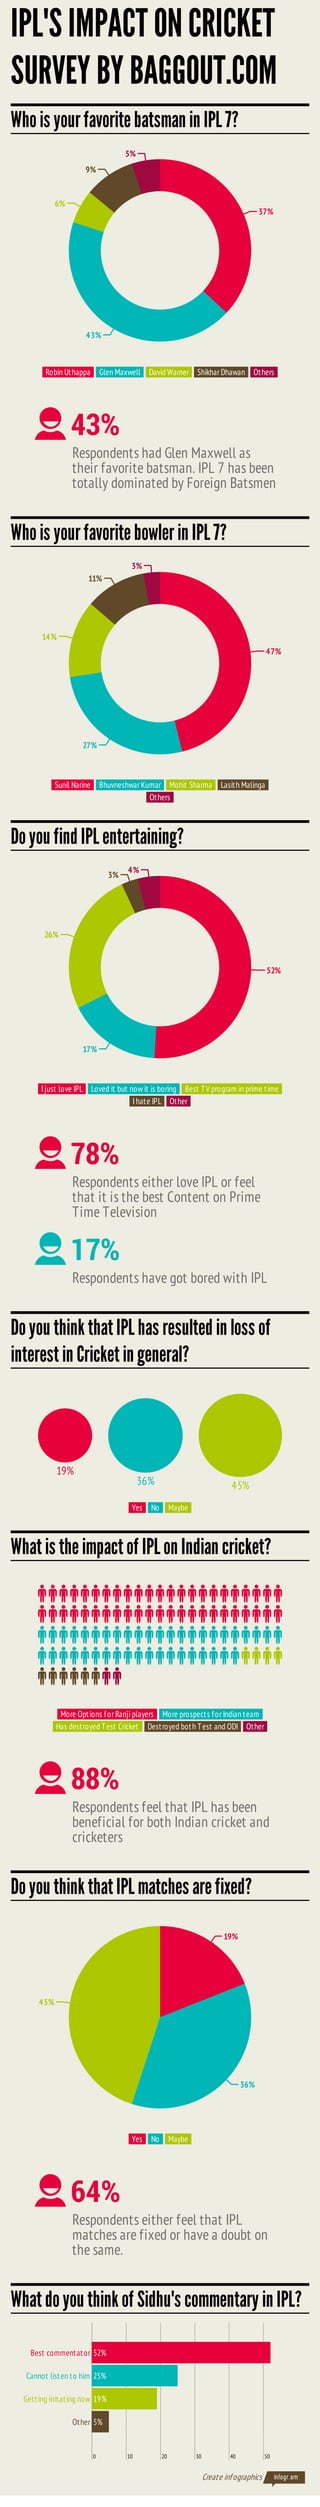 /api/stylesheets/44?nofonts=1	
IPL'S	IMPACT	ON	CRICKET
SURVEY	BY	BAGGOUT.COM
Who	is	your	favorite	batsman	in	IPL	7?
Robin	Uthappa Glen	Maxwell David	Warner Shikhar	Dhawan Others
37%
43%
6%
9%
5%
43%
Respondents had Glen Maxwell as
their favorite batsman. IPL 7 has been
totally dominated by Foreign Batsmen
Who	is	your	favorite	bowler	in	IPL	7?
Sunil	Narine Bhuvneshwar	Kumar Mohit	Sharma Lasith	Malinga
Others
47%
27%
14%
11%
3%
Do	you	find	IPL	entertaining?
I	just	love	IPL Loved	it	but	now	it	is	boring Best	TV	program	in	prime	time
I	hate	IPL Other
52%
17%
26%
3%
4%
78%
Respondents either love IPL or feel
that it is the best Content on Prime
Time Television
17%
Respondents have got bored with IPL
Do	you	think	that	IPL	has	resulted	in	loss	of
interest	in	Cricket	in	general?
Yes No Maybe
19%
36% 45%
What	is	the	impact	of	IPL	on	Indian	cricket?
More	Options	for	Ranji	players More	prospects	for	Indian	team
Has	destroyed	Test	Cricket Destroyed	both	Test	and	ODI Other
88%
Respondents feel that IPL has been
beneficial for both Indian cricket and
cricketers
Do	you	think	that	IPL	matches	are	fixed?
Yes No Maybe
19%
36%
45%
64%
Respondents either feel that IPL
matches are fixed or have a doubt on
the same.
What	do	you	think	of	Sidhu's	commentary	in	IPL?
0 10 20 30 40 50
52%Best	commentator
25%Cannot	listen	to	him
19%Getting	irritating	now
5%Other
Create	infographics
 